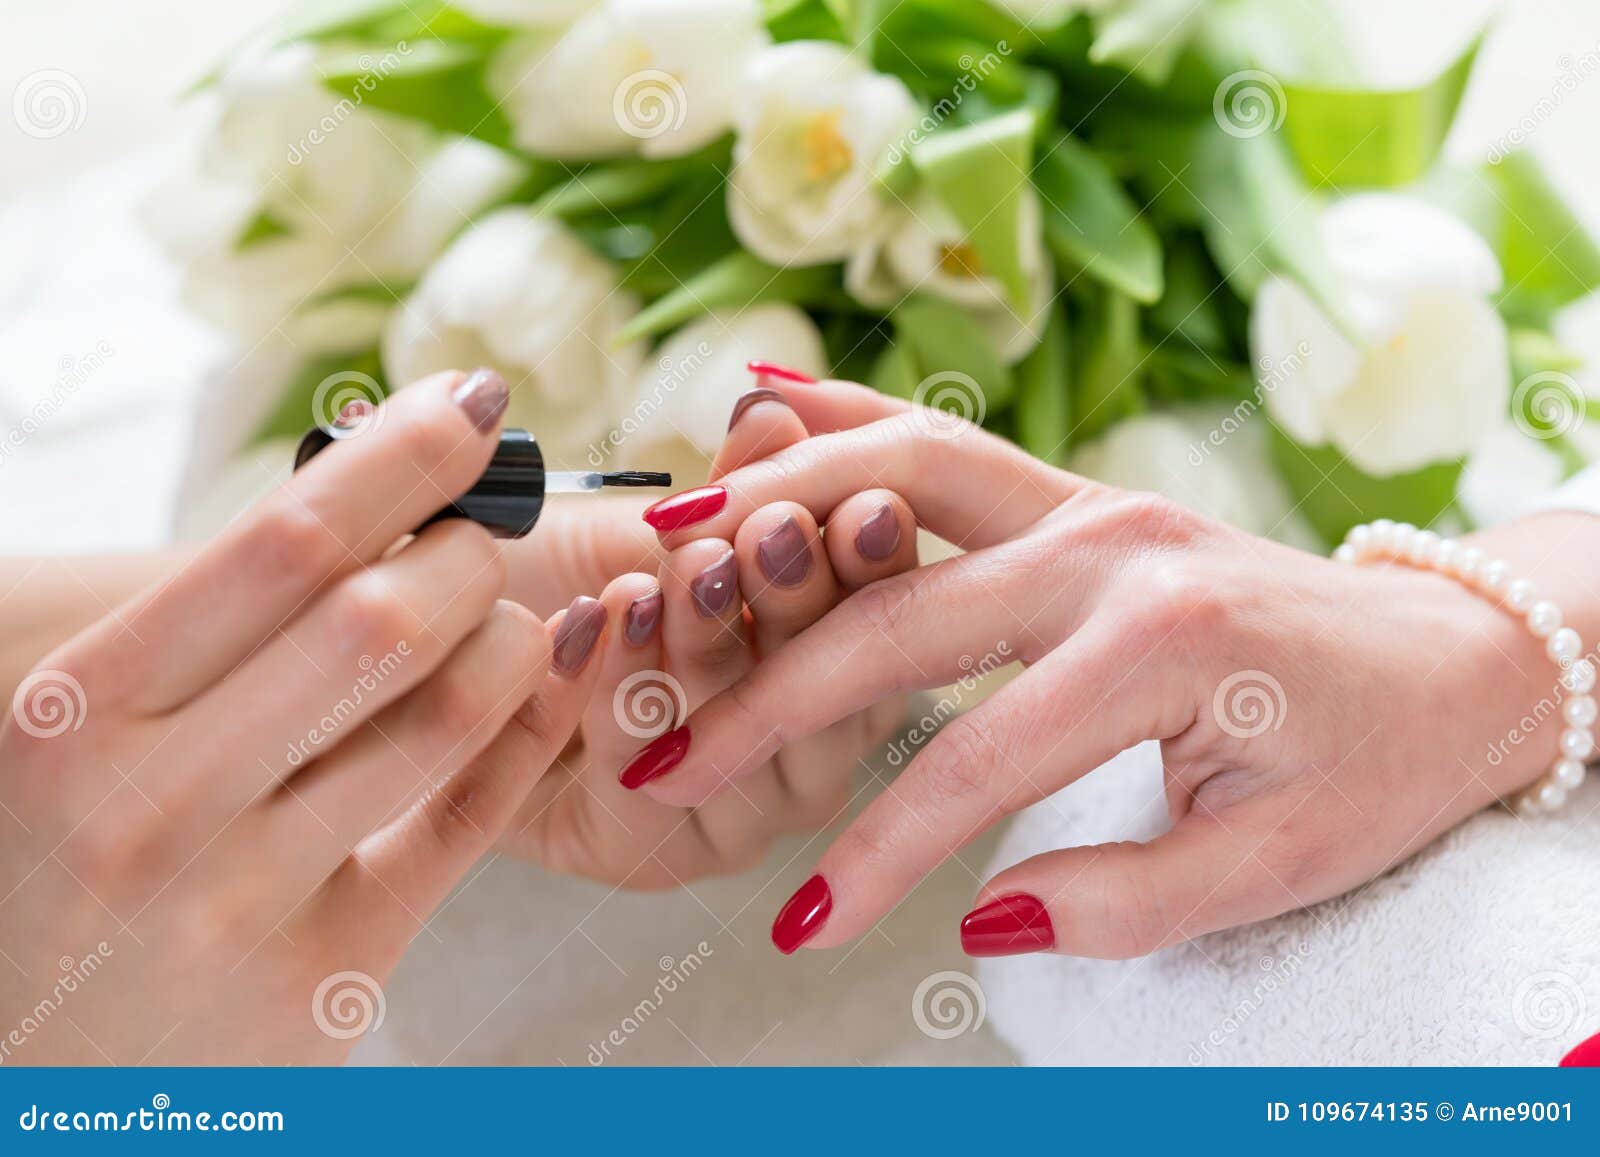 hands of a skilled manicurist applying red nail polish on nails